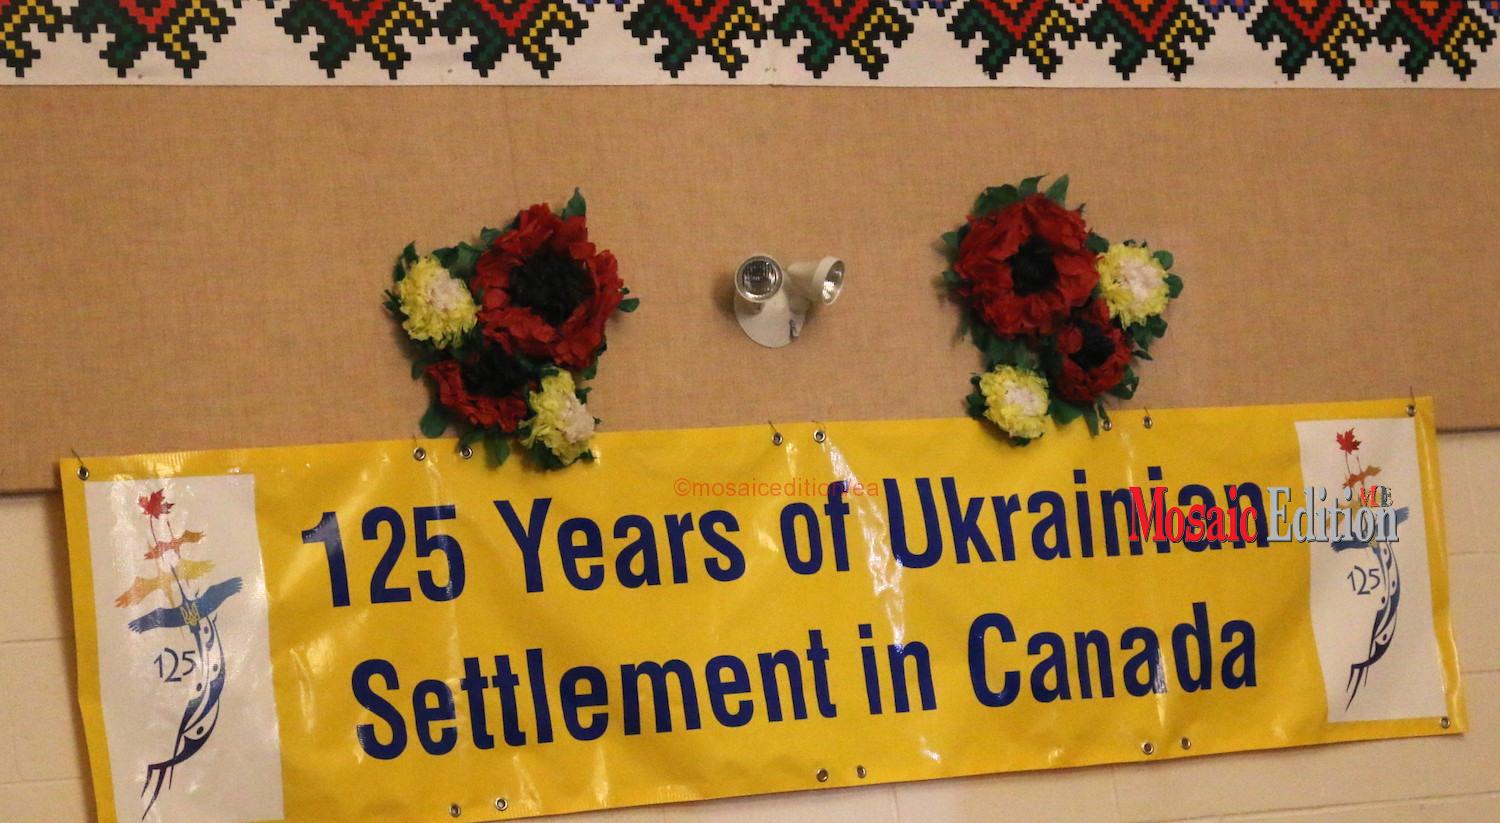 The Ukrainian Congress is celebrating 125 Years Of Settlement in Canada..mosaicedition/ea